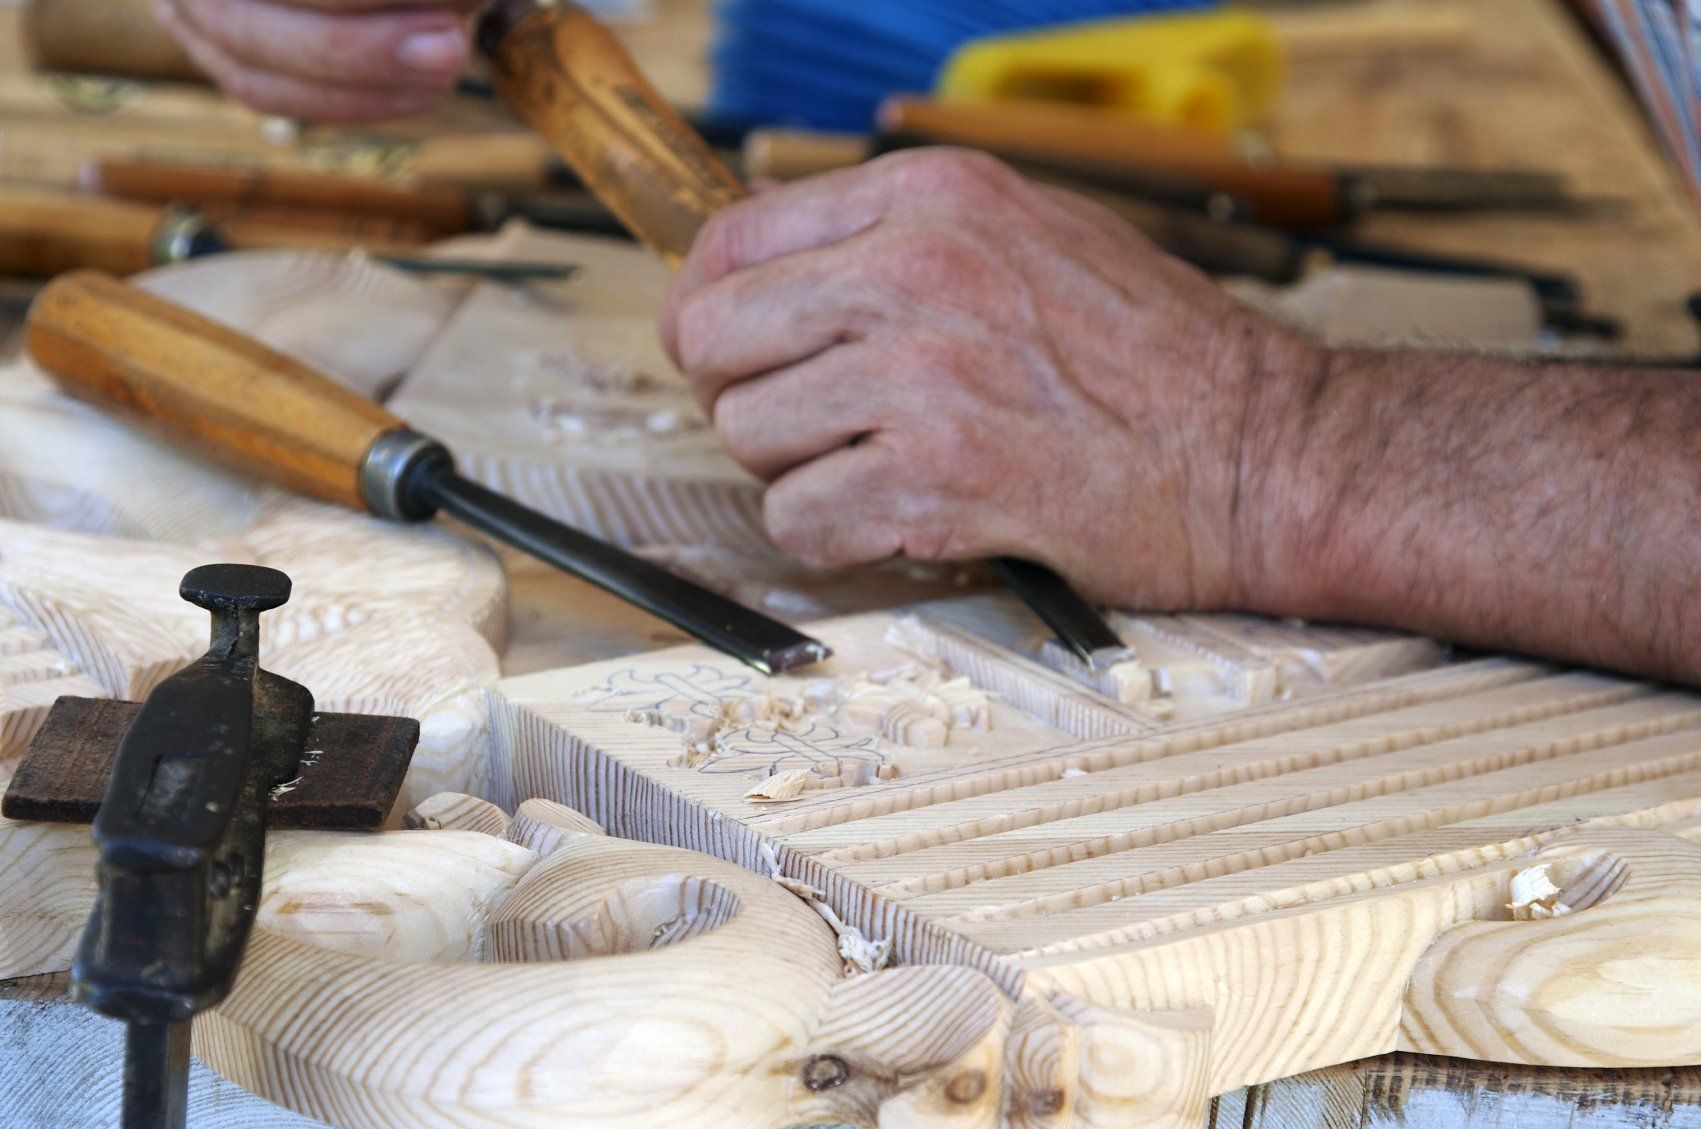 A woodworker carving a piece of wood  on his workbench